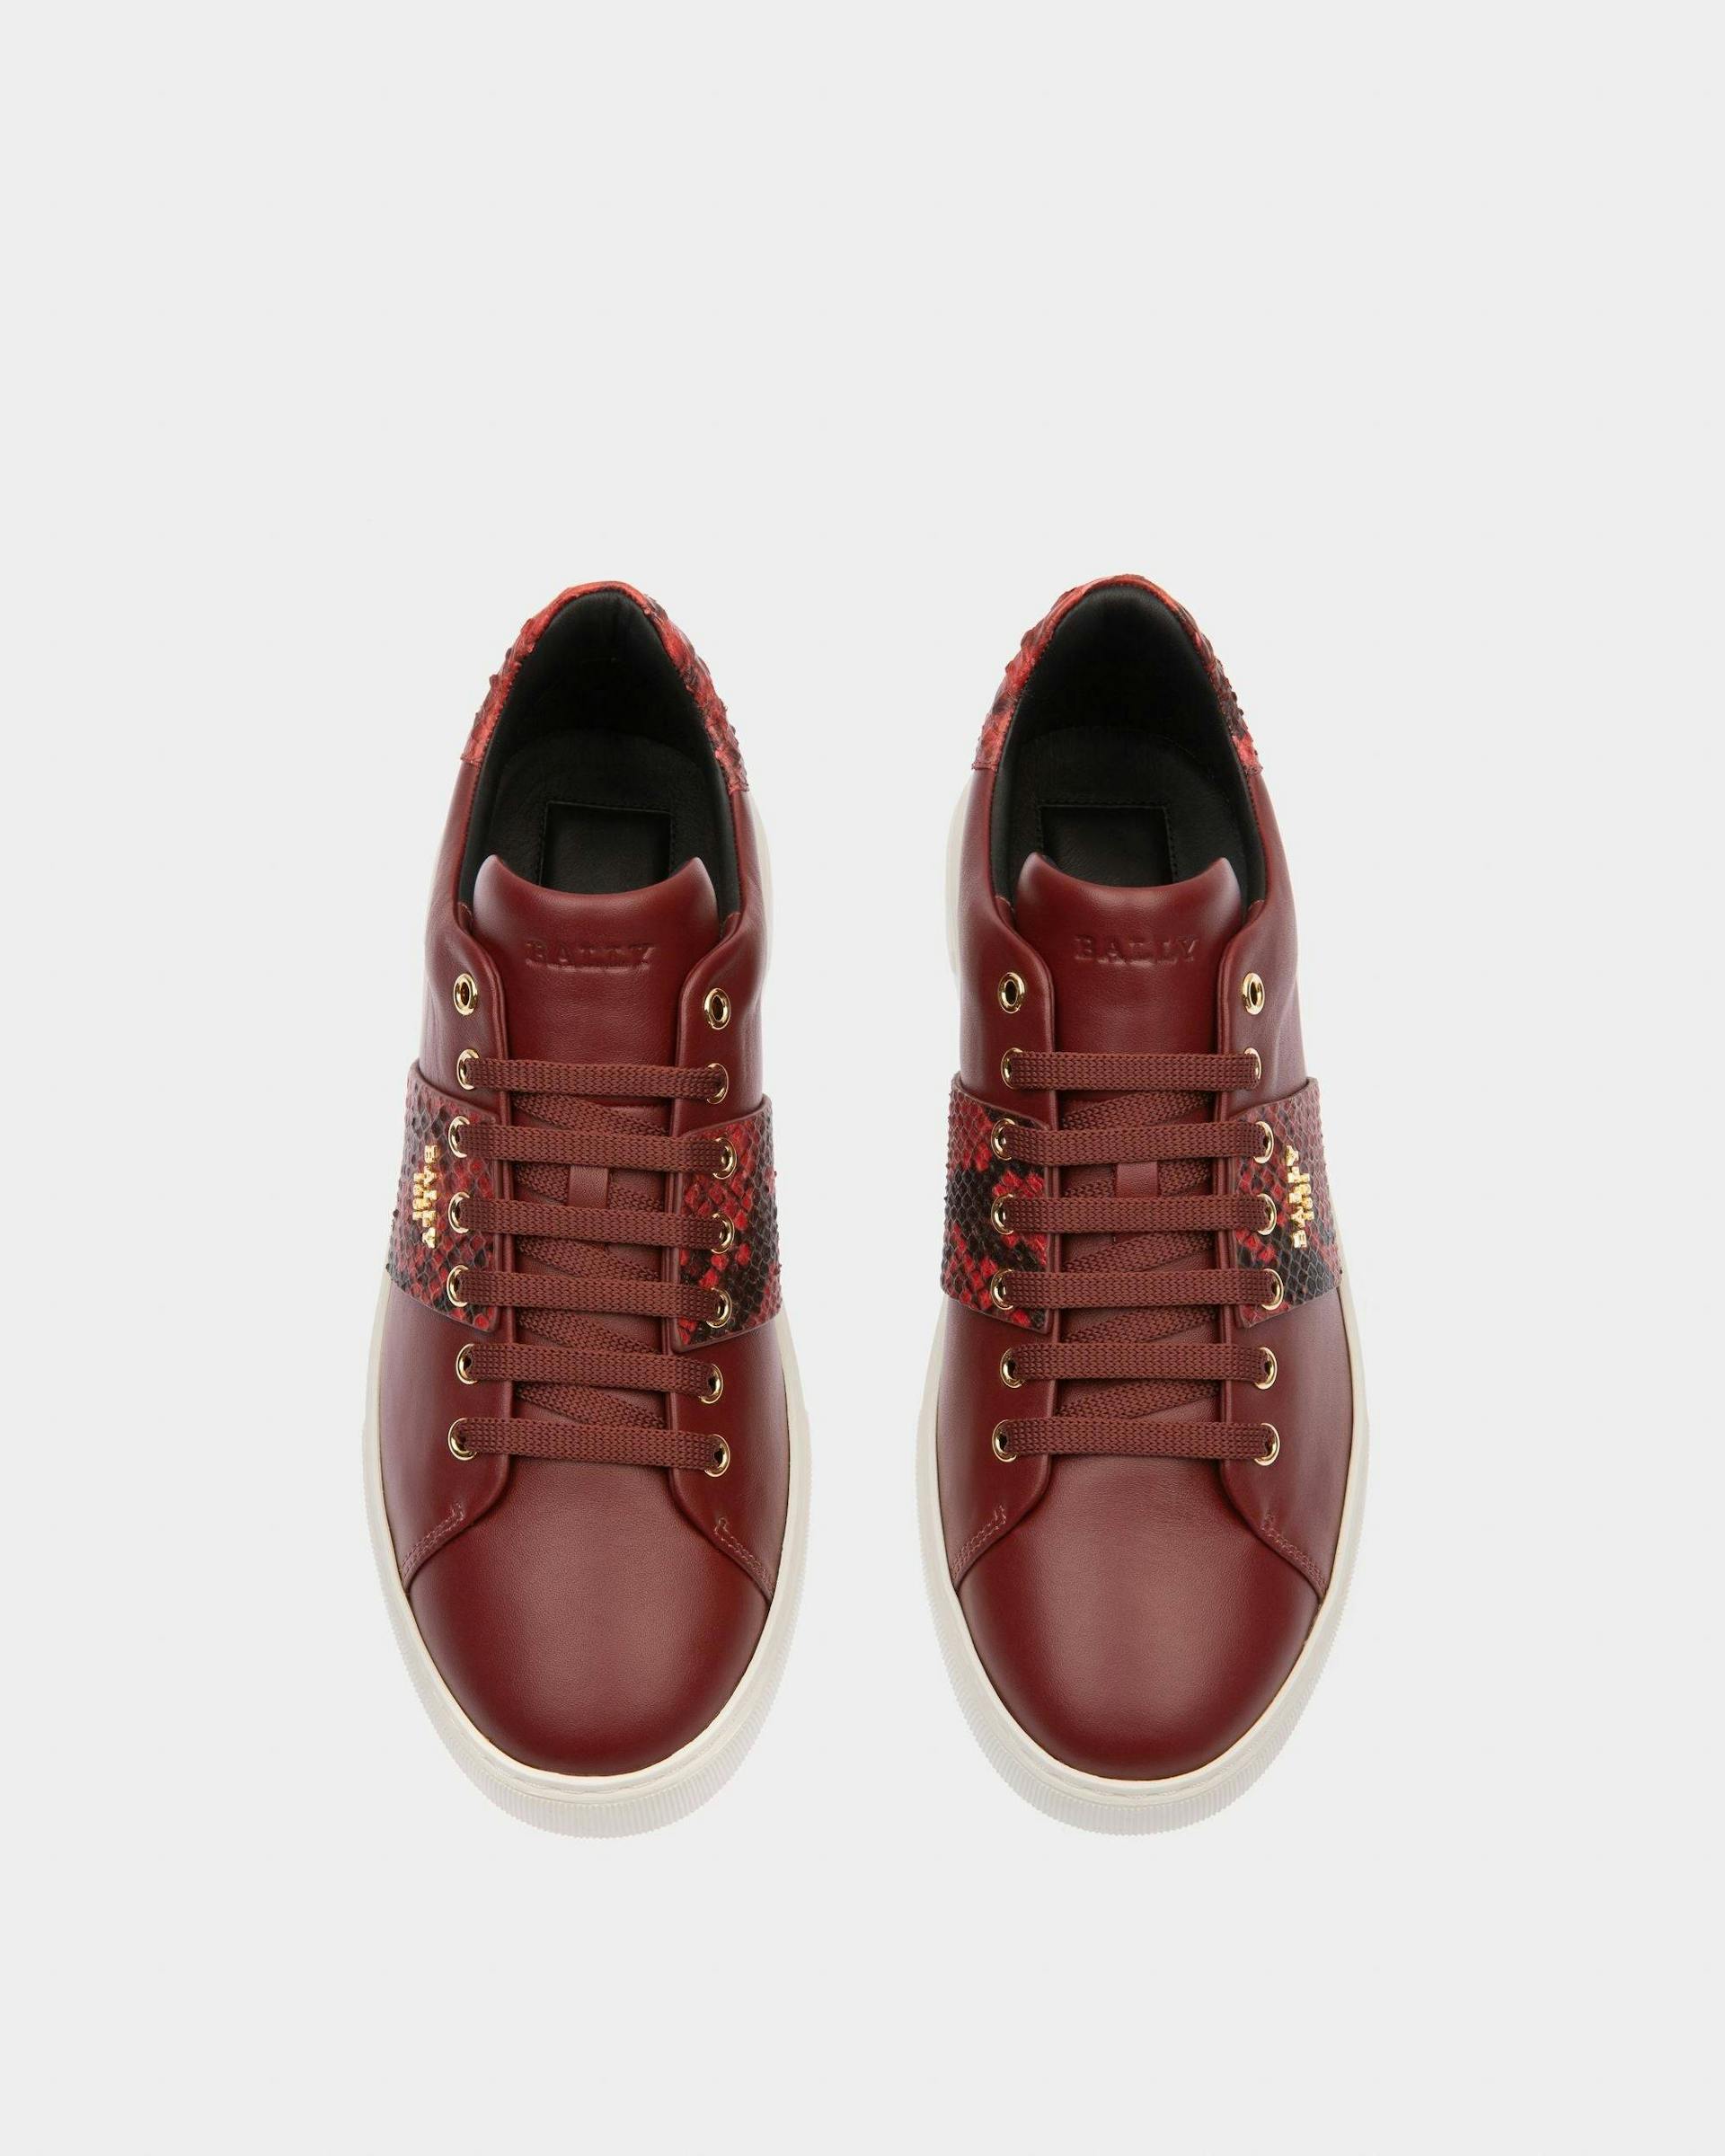 Mattye Leather Sneakers In Heritage Red - Men's - Bally - 02